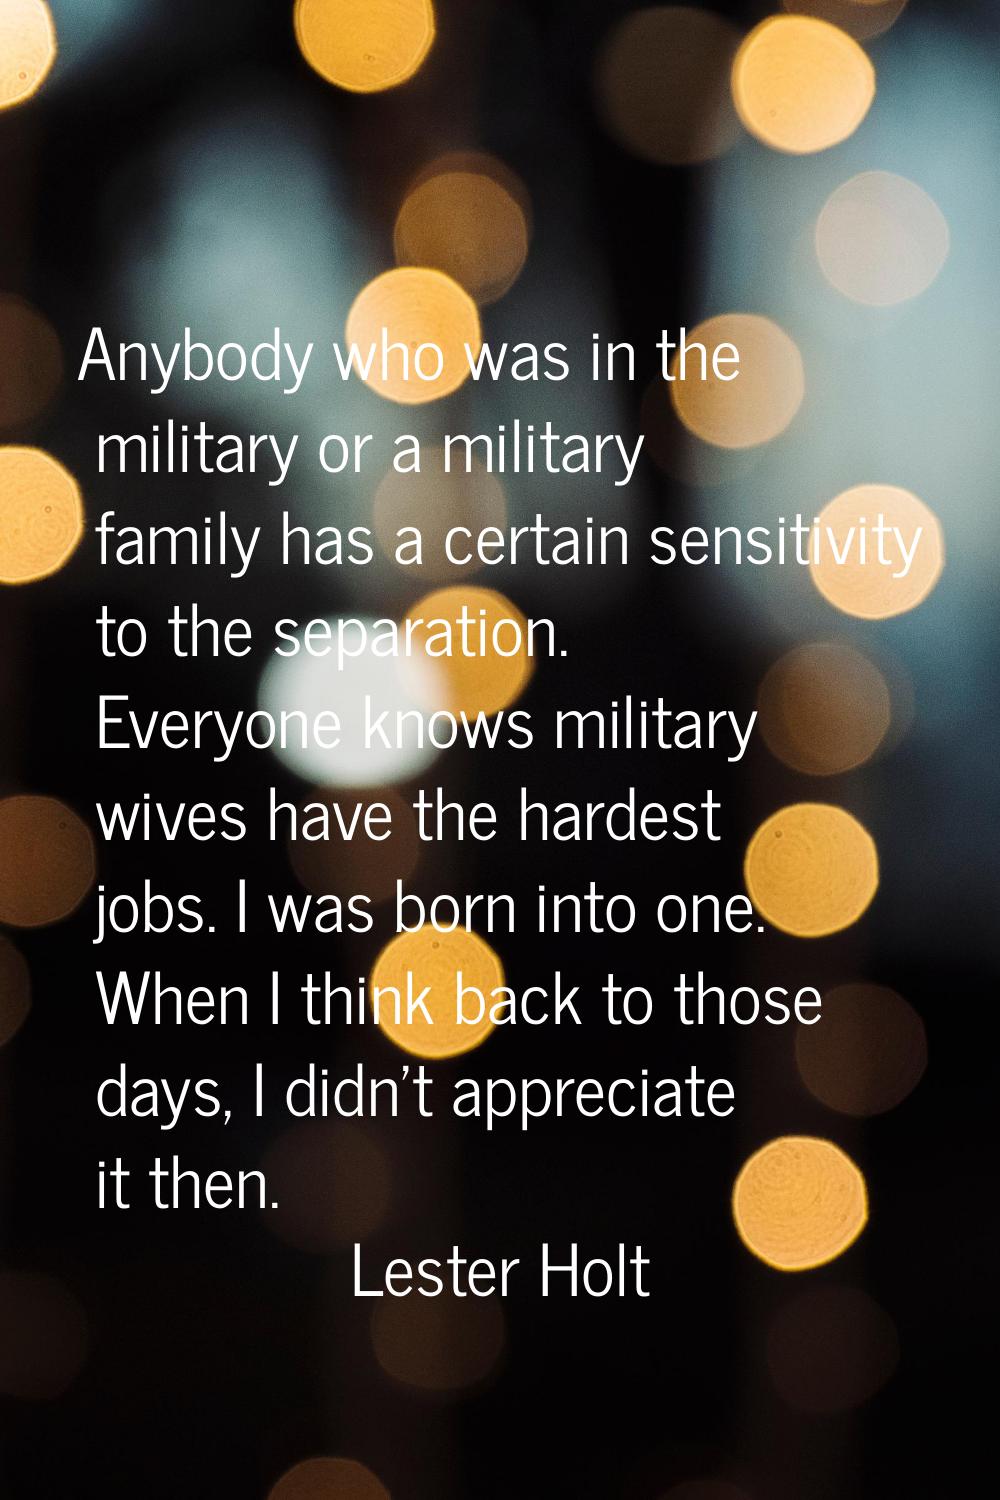 Anybody who was in the military or a military family has a certain sensitivity to the separation. E